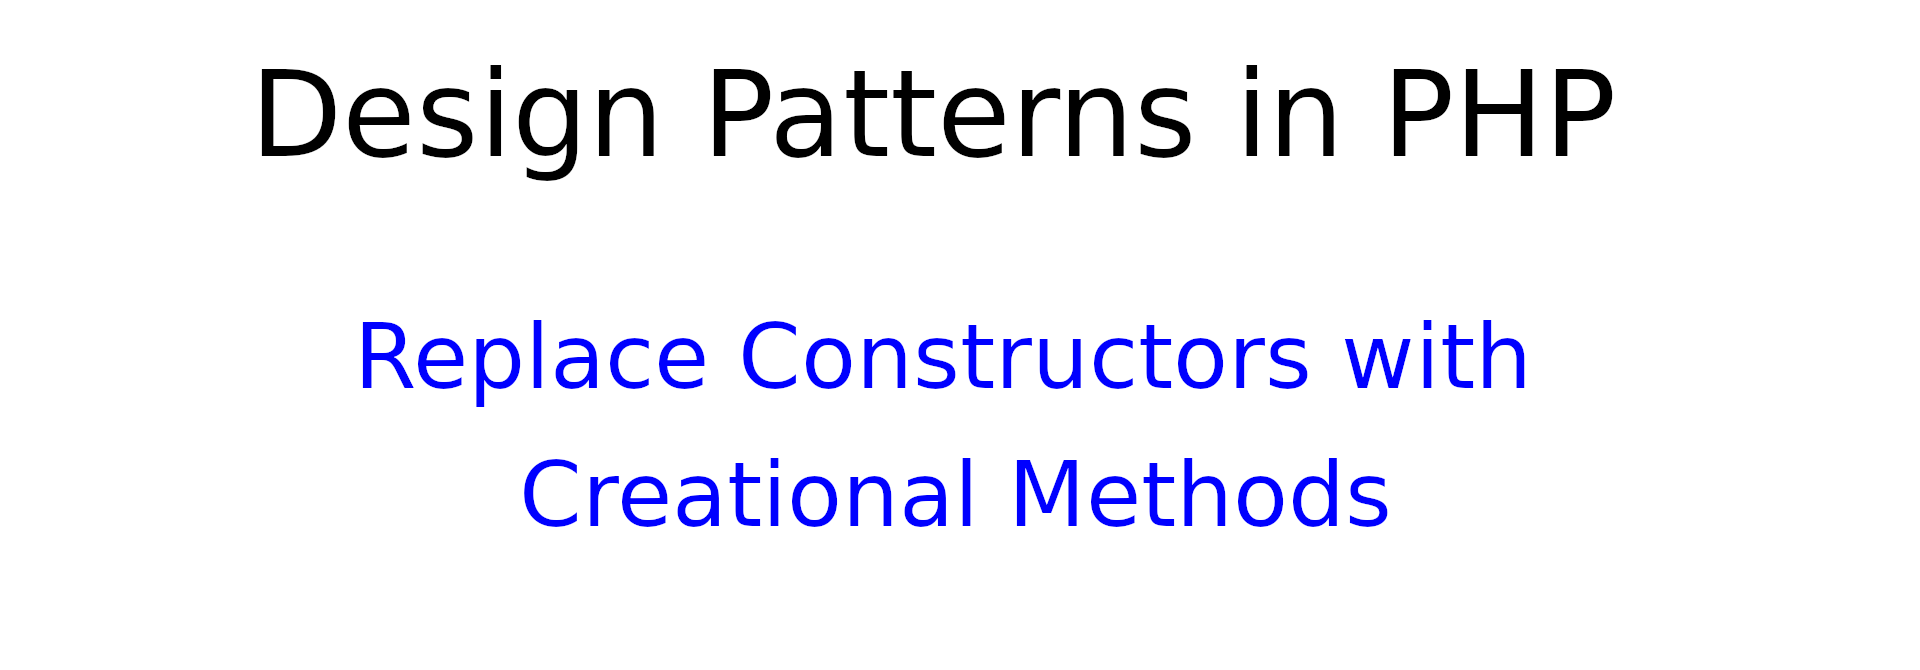 Design patterns in PHP: Replace Constructors with Creation Methods